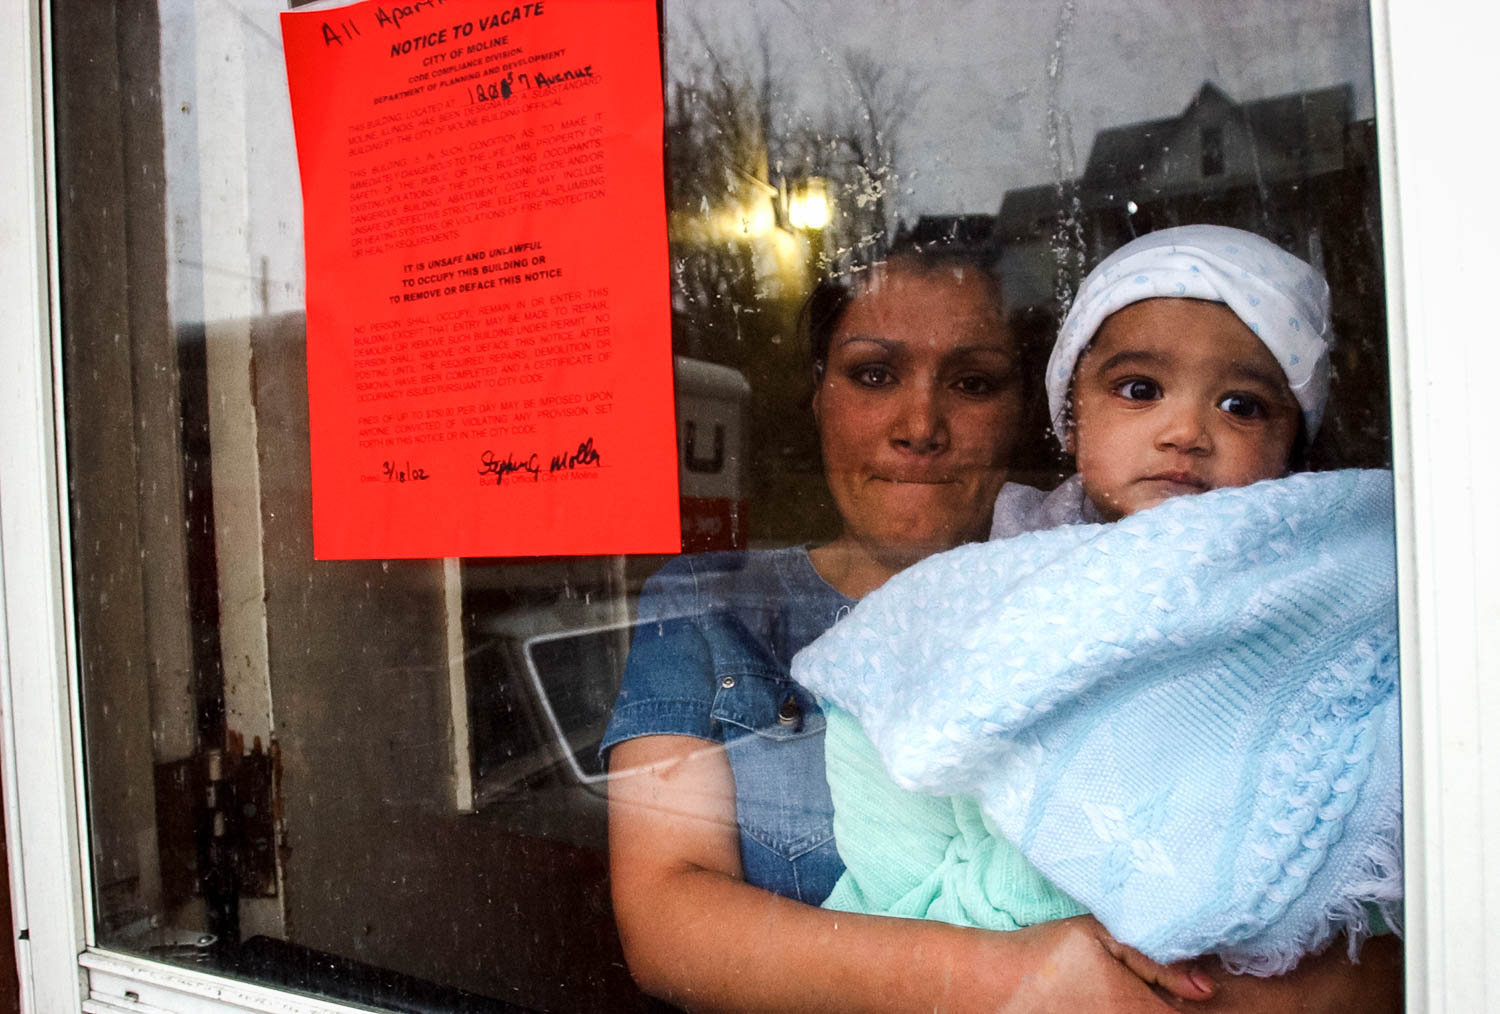 Luzmaria Carpia and her 7-month son Alejandero watch their friends and neighbors load their belongings into trucks and cars after the city of Moline evicted the apartment building's 10 families because safety violations. The families had less than one day of notice to move out. The mother of five children, whose husband is back in Mexico, didn't have any idea where she planned to go. (Todd Mizener - Dispatch/Argus)